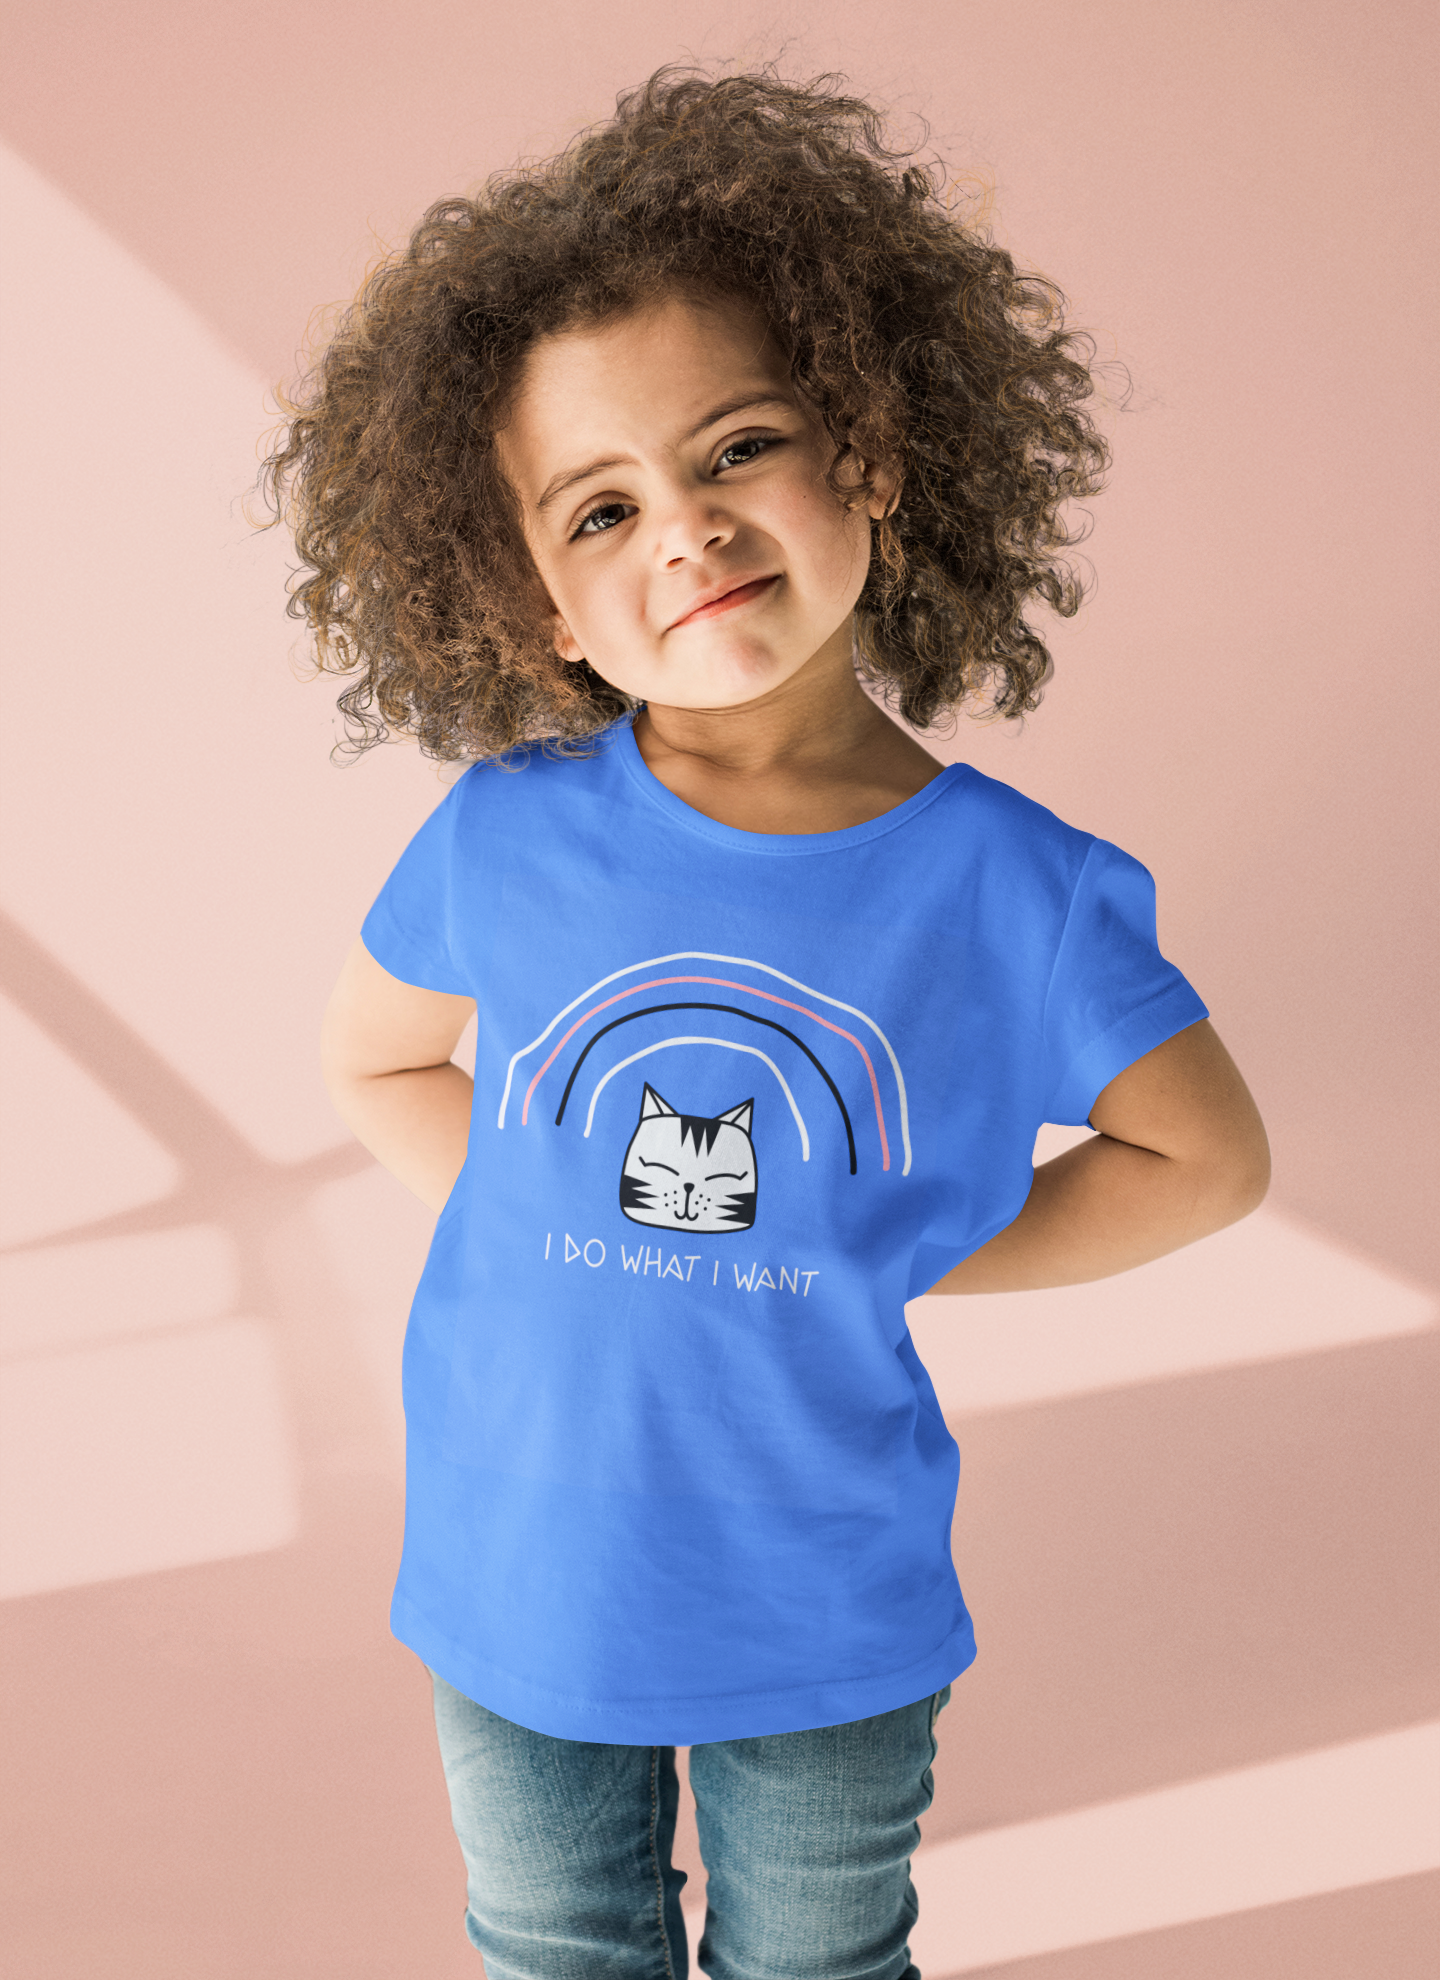 crew-neck-t-shirt-mockup-of-a-curly-haired-girl-at-a-studio-44368-r-el2.png